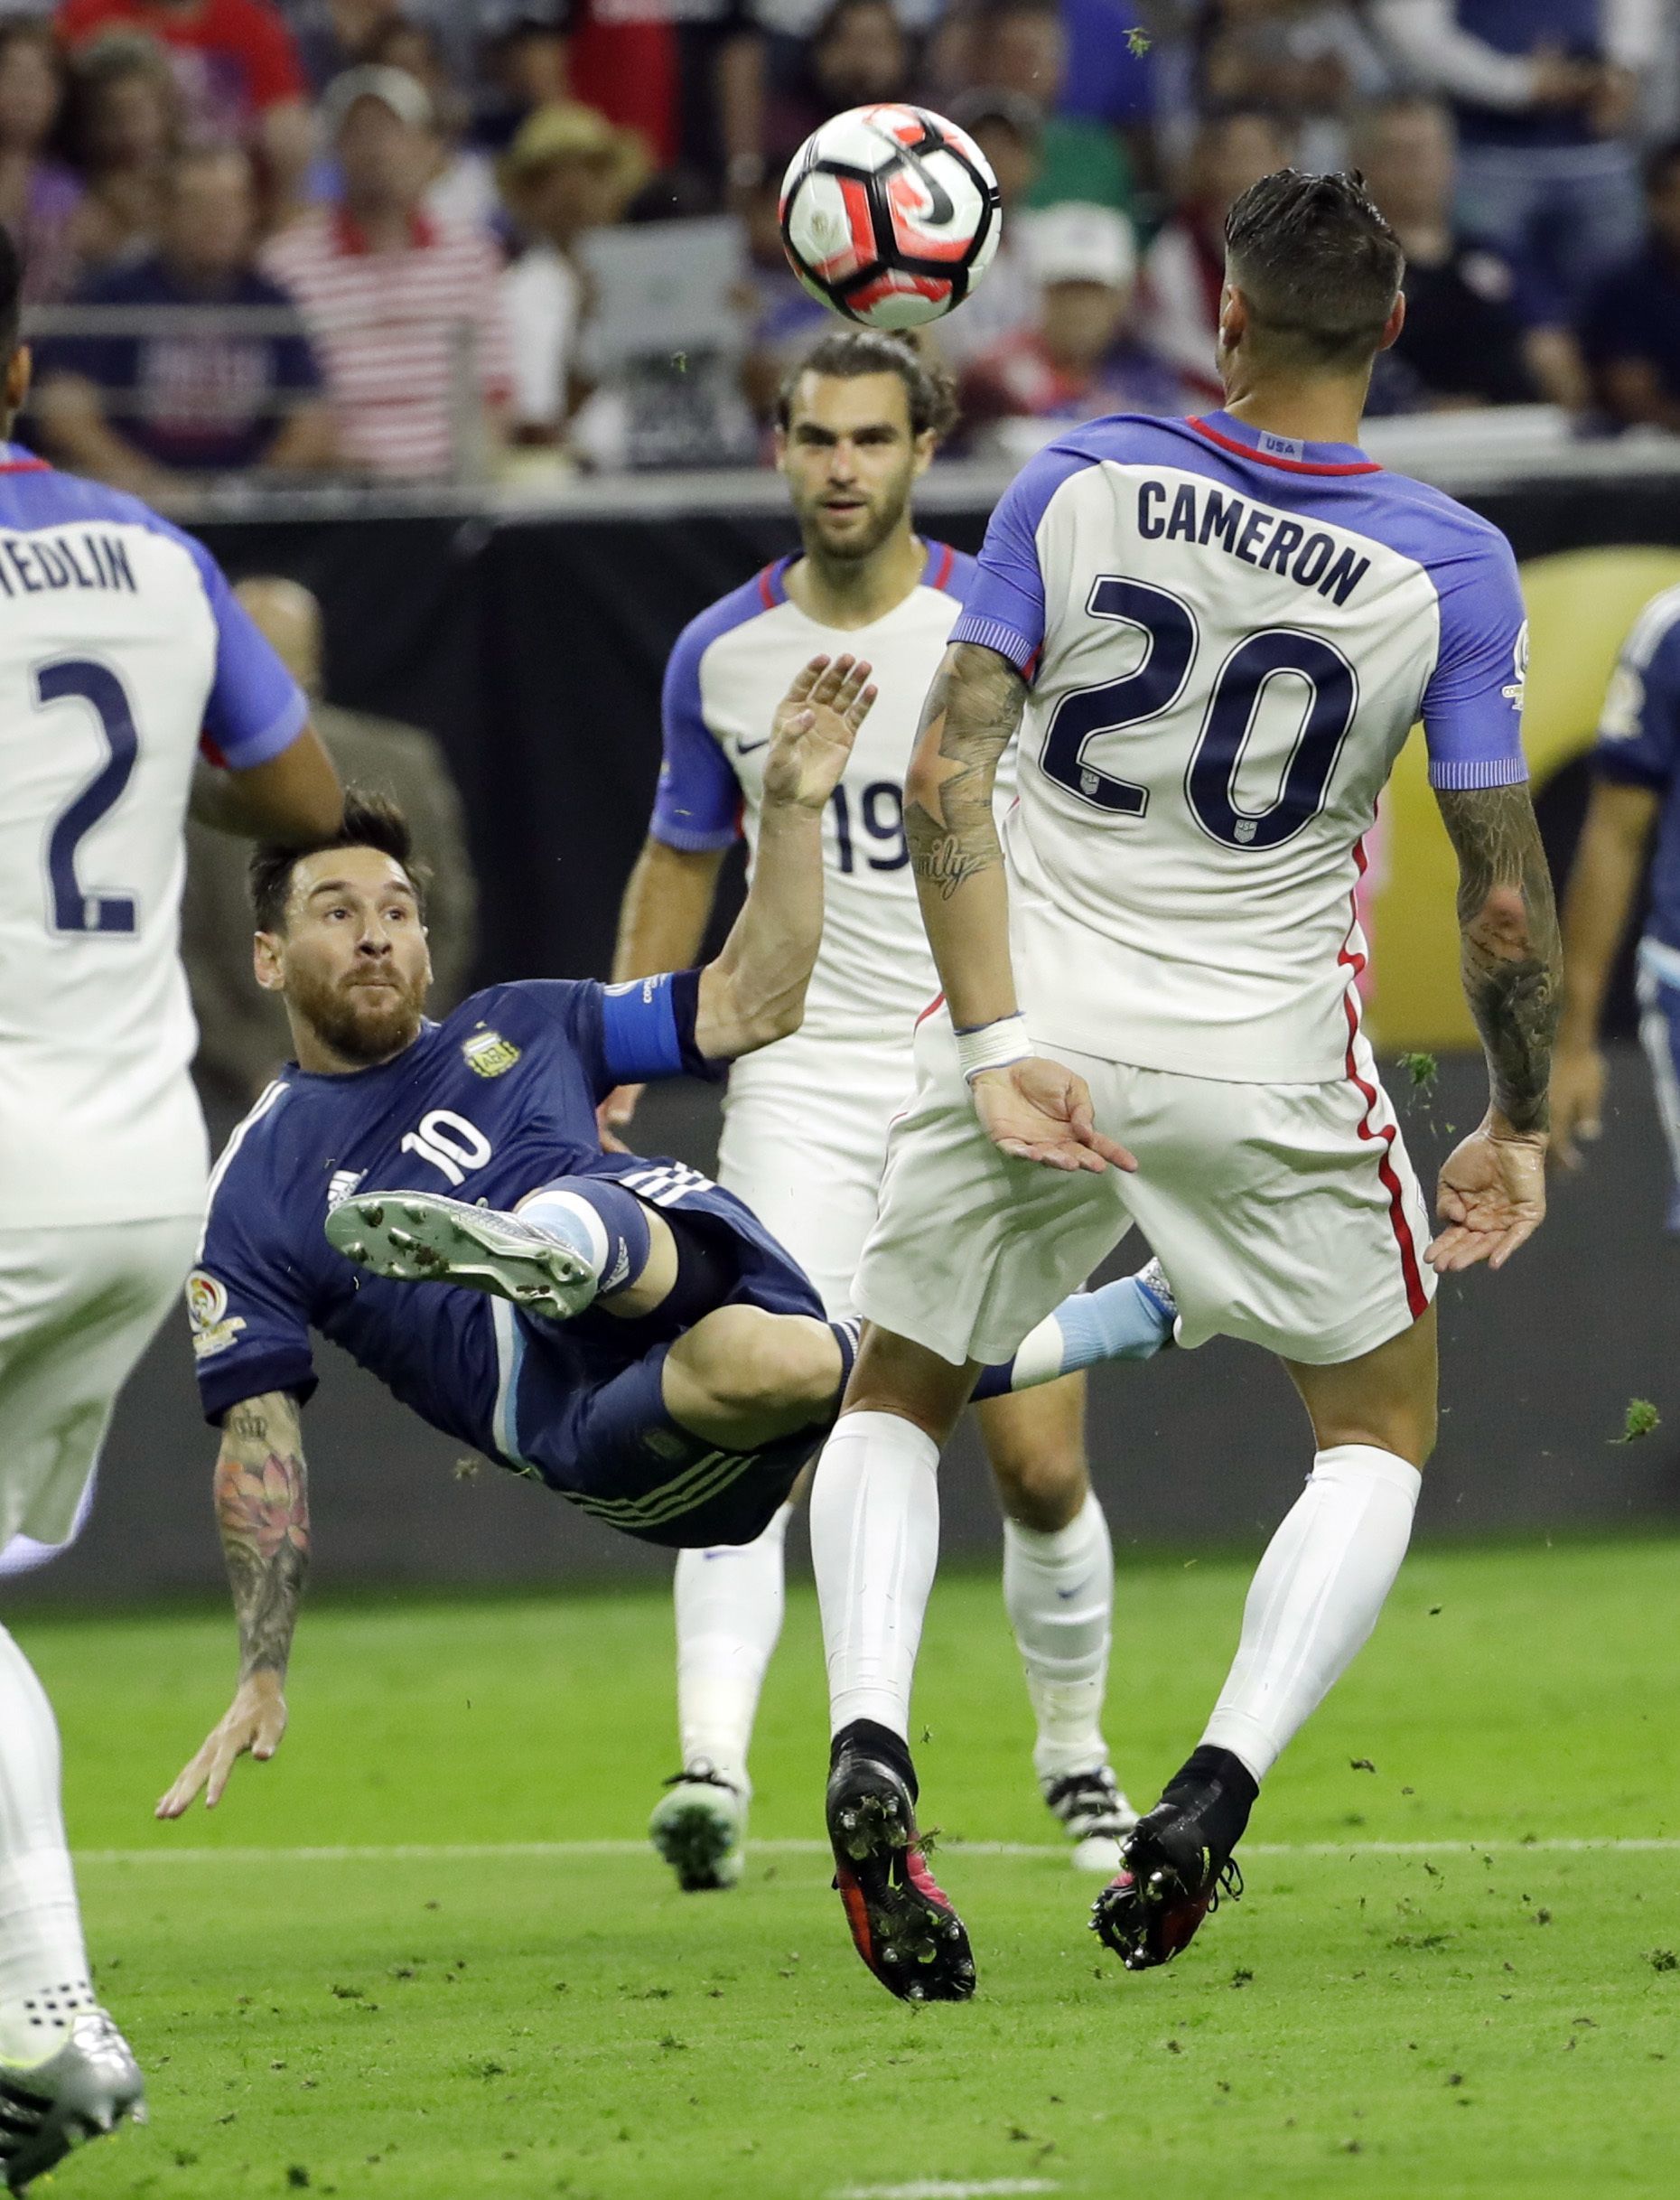 Argentina’s Lionel Messi (10) kicks the ball away from United States defender Geoff Cameron (20) during Tuesday’s Copa America semifinal.